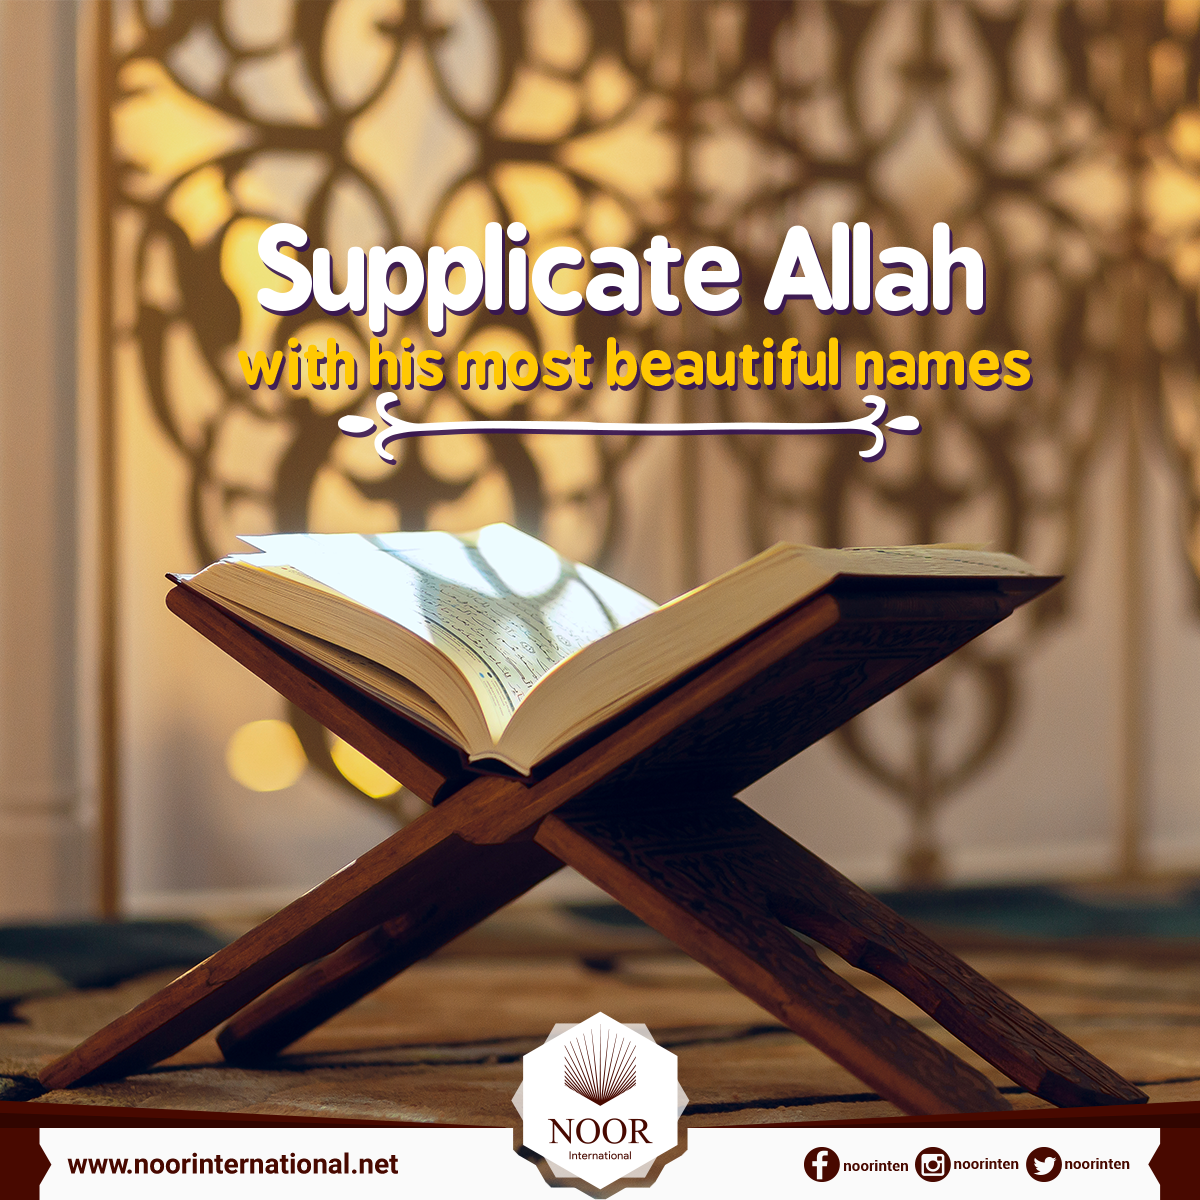 Supplicate Allah with his most beautiful names